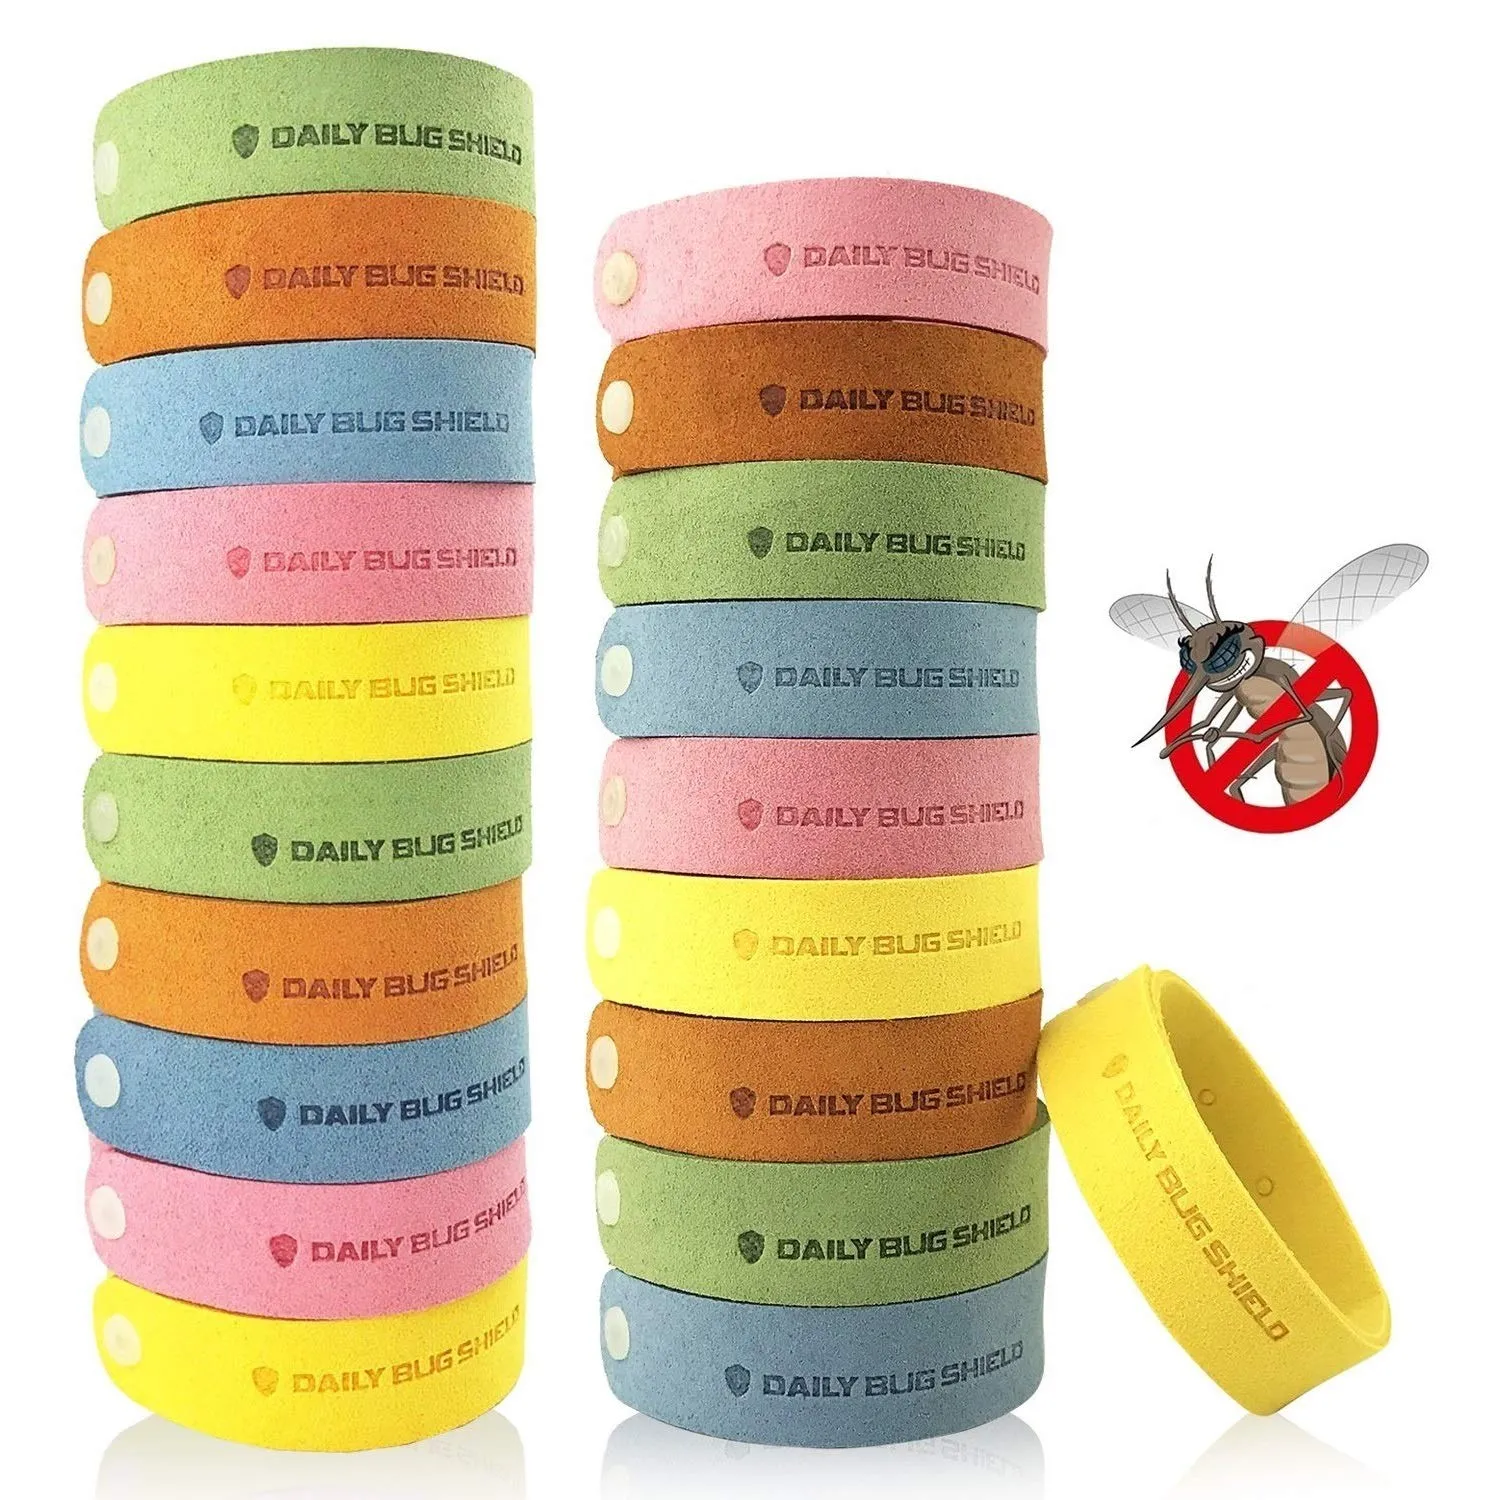 Pest Control Mosquito Repellent Bracelet Deet Insect Band Safe For Kids And Adts Waterproof Bug Wristband Indoor Outdoor Each Protec Dhb6Y